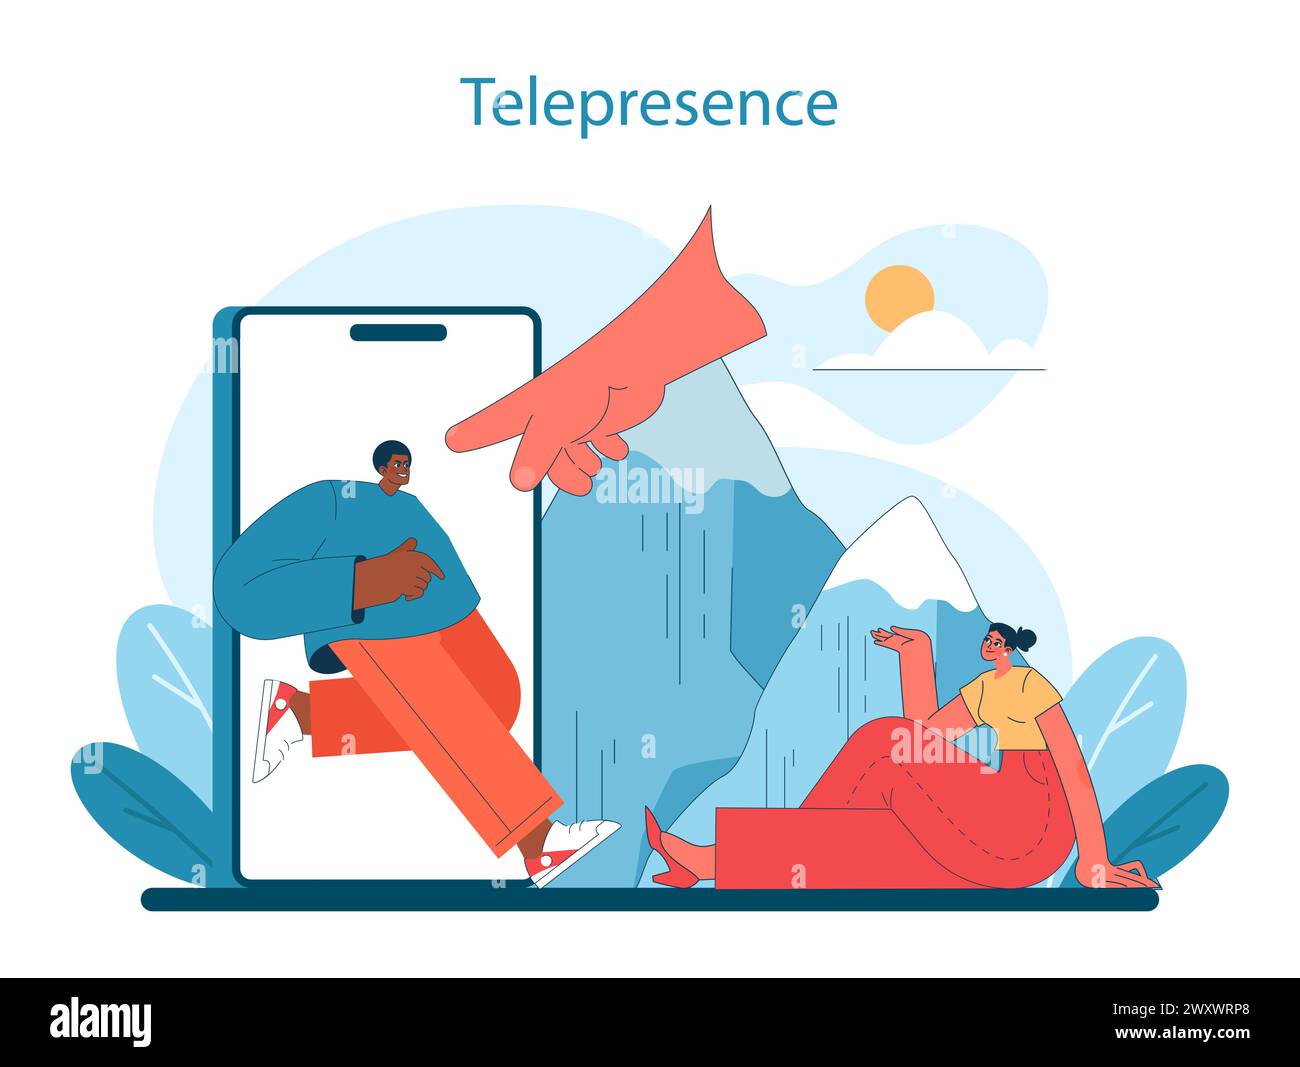 Telepresence in Virtual Tourism. Man interacts with a giant smartphone, bridging distances with innovative technology. Vector illustration. Stock Vector